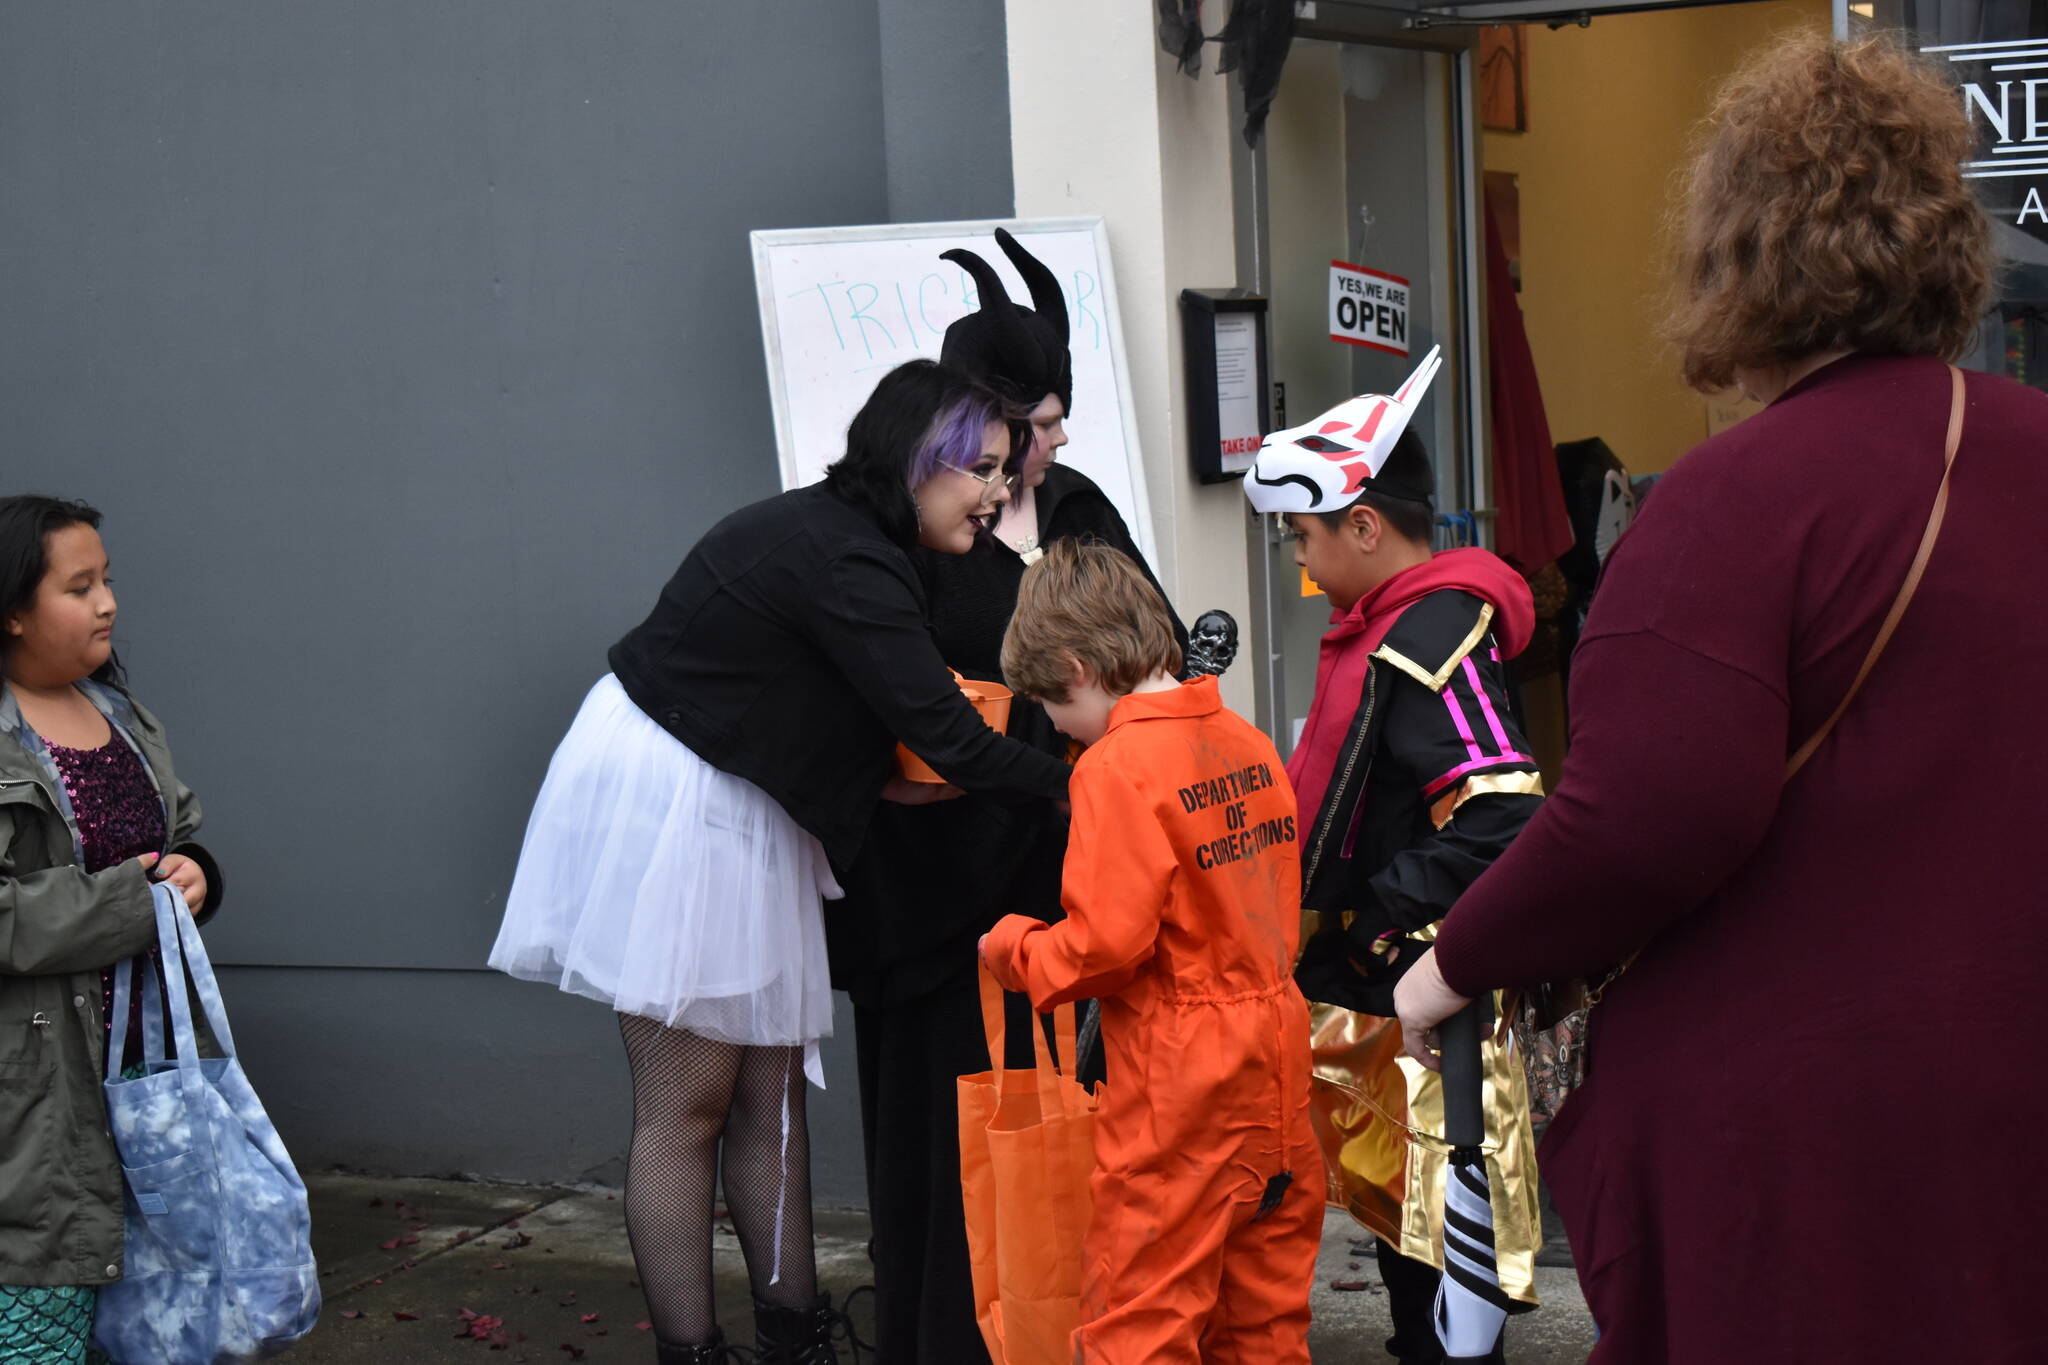 Children and teenagers lined up and down Main Street to collect candy from outside local businesses or from booths set up nearby. Over 20 businesses and organizations handed out candy during the Elma Fall Festival on Halloween.